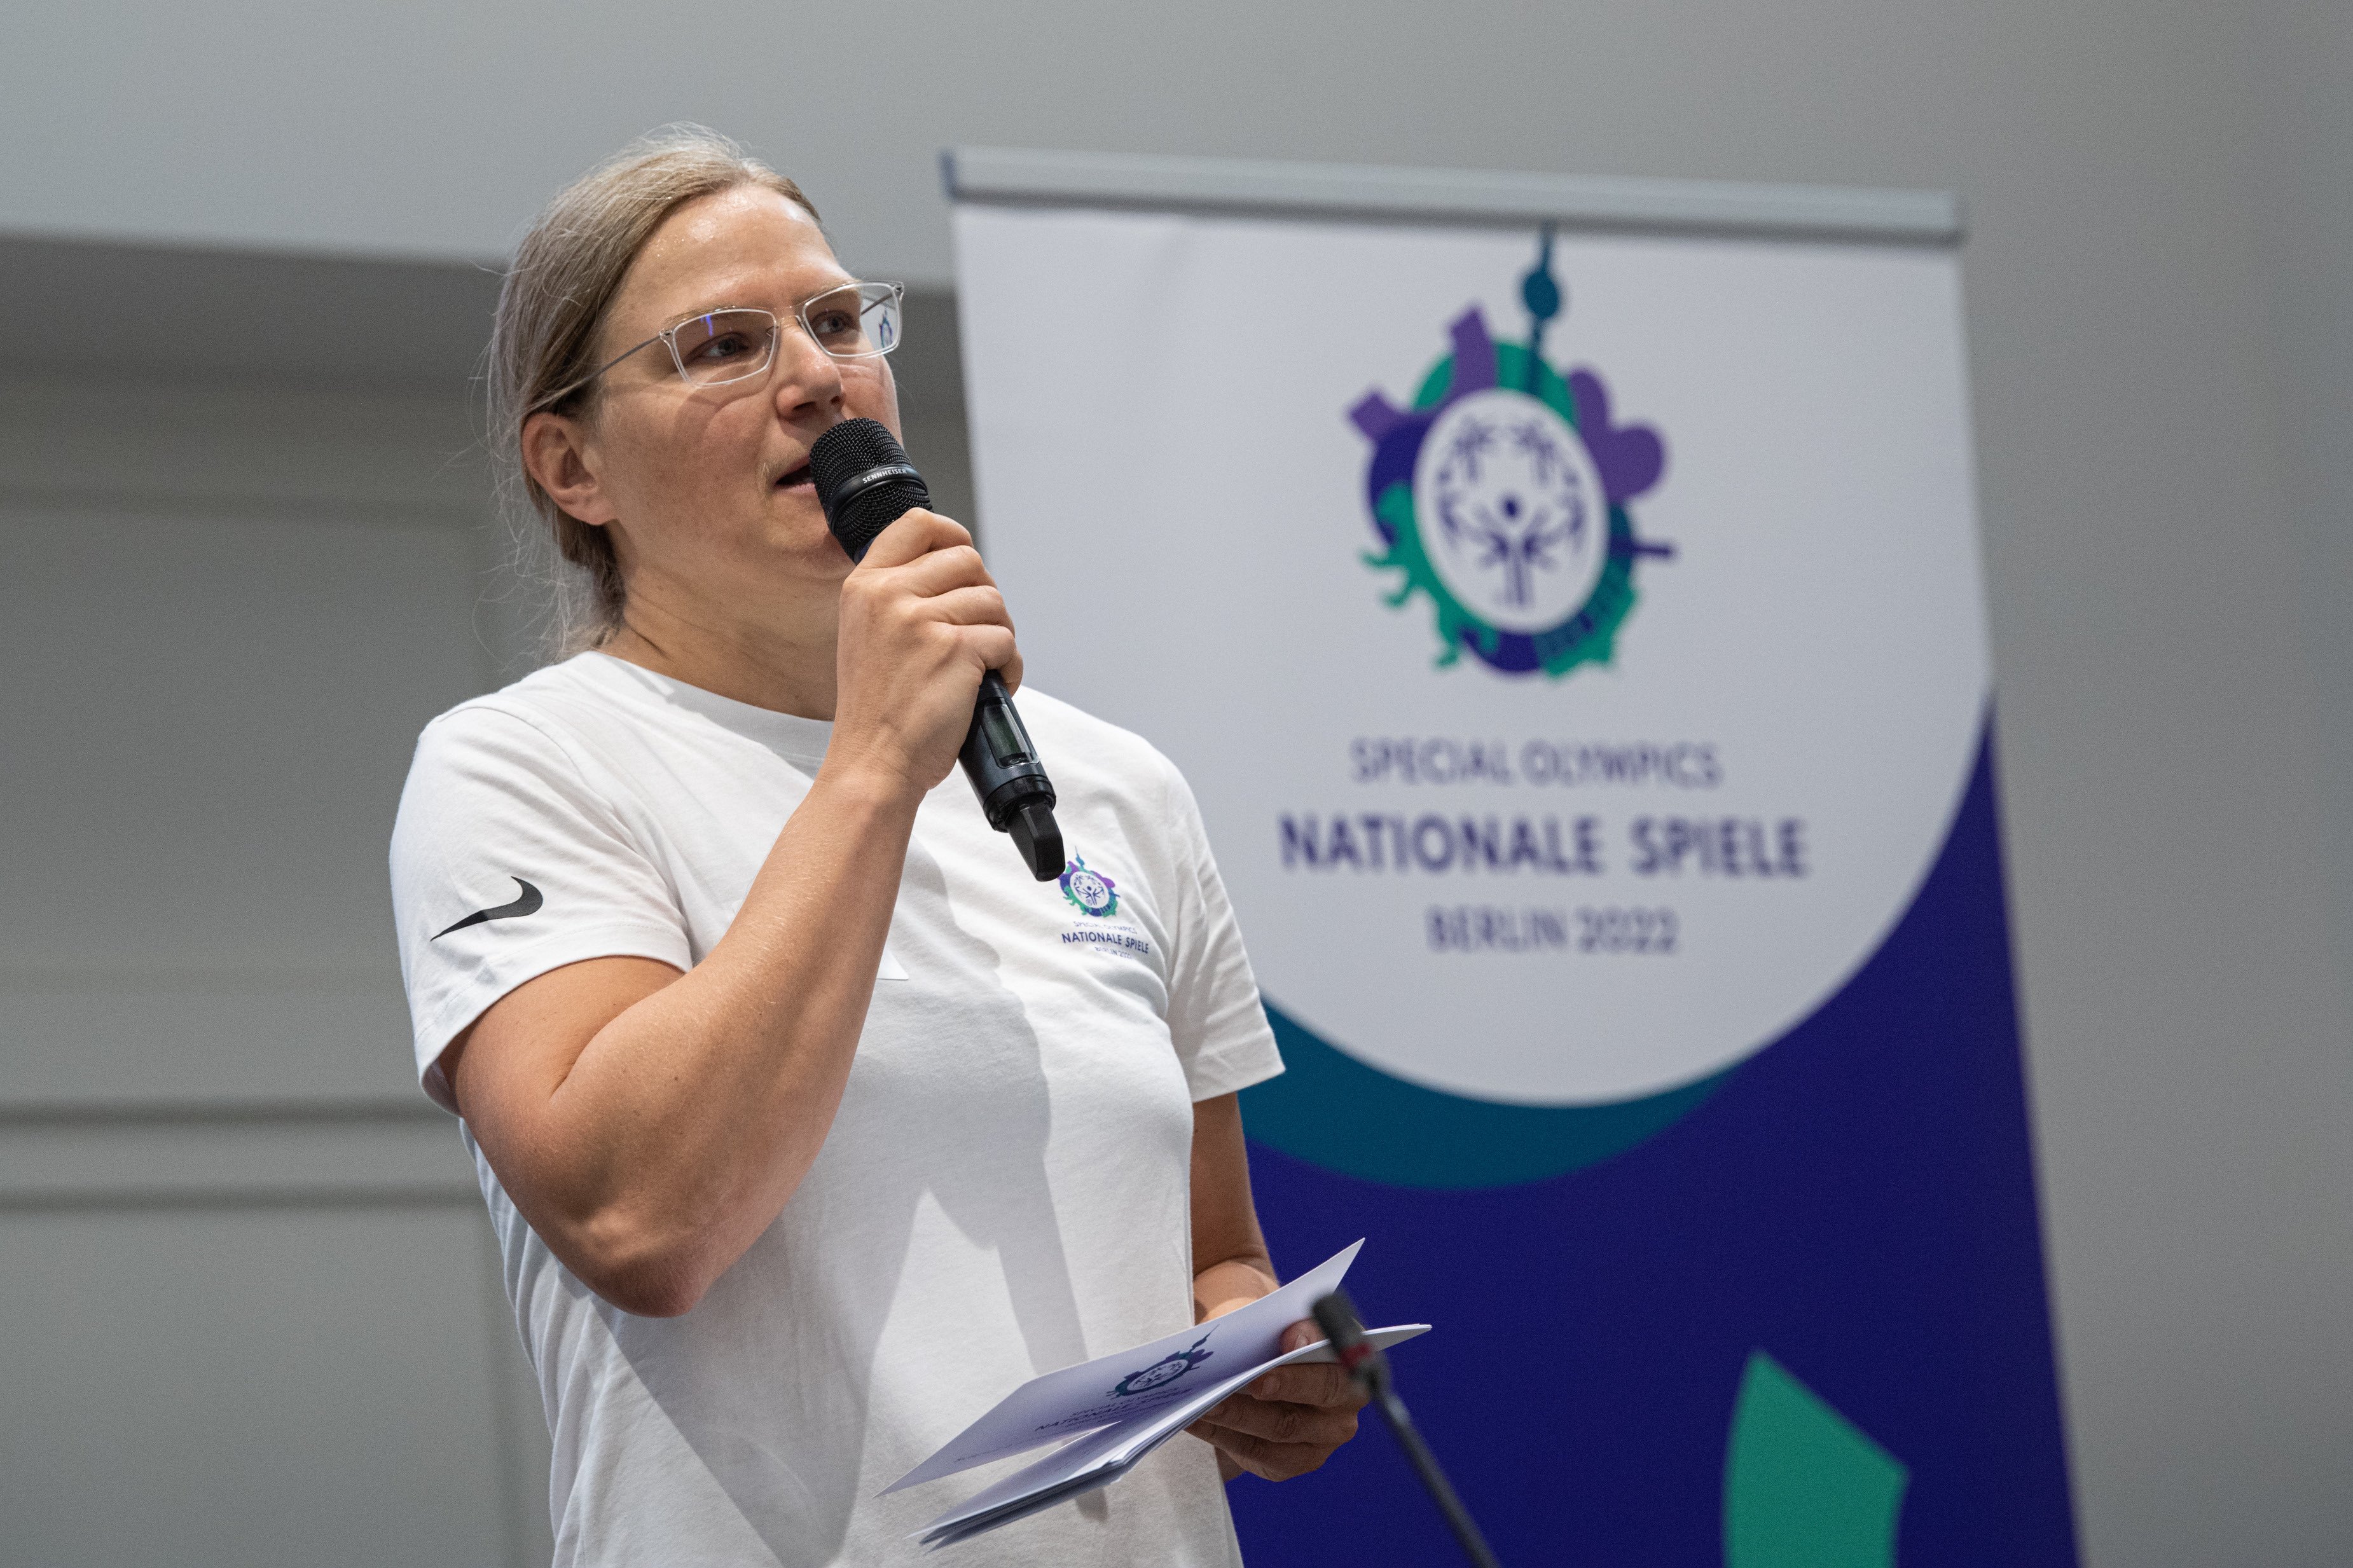 Special Olympics World Games Berlin 2023/ Annegret Hilse